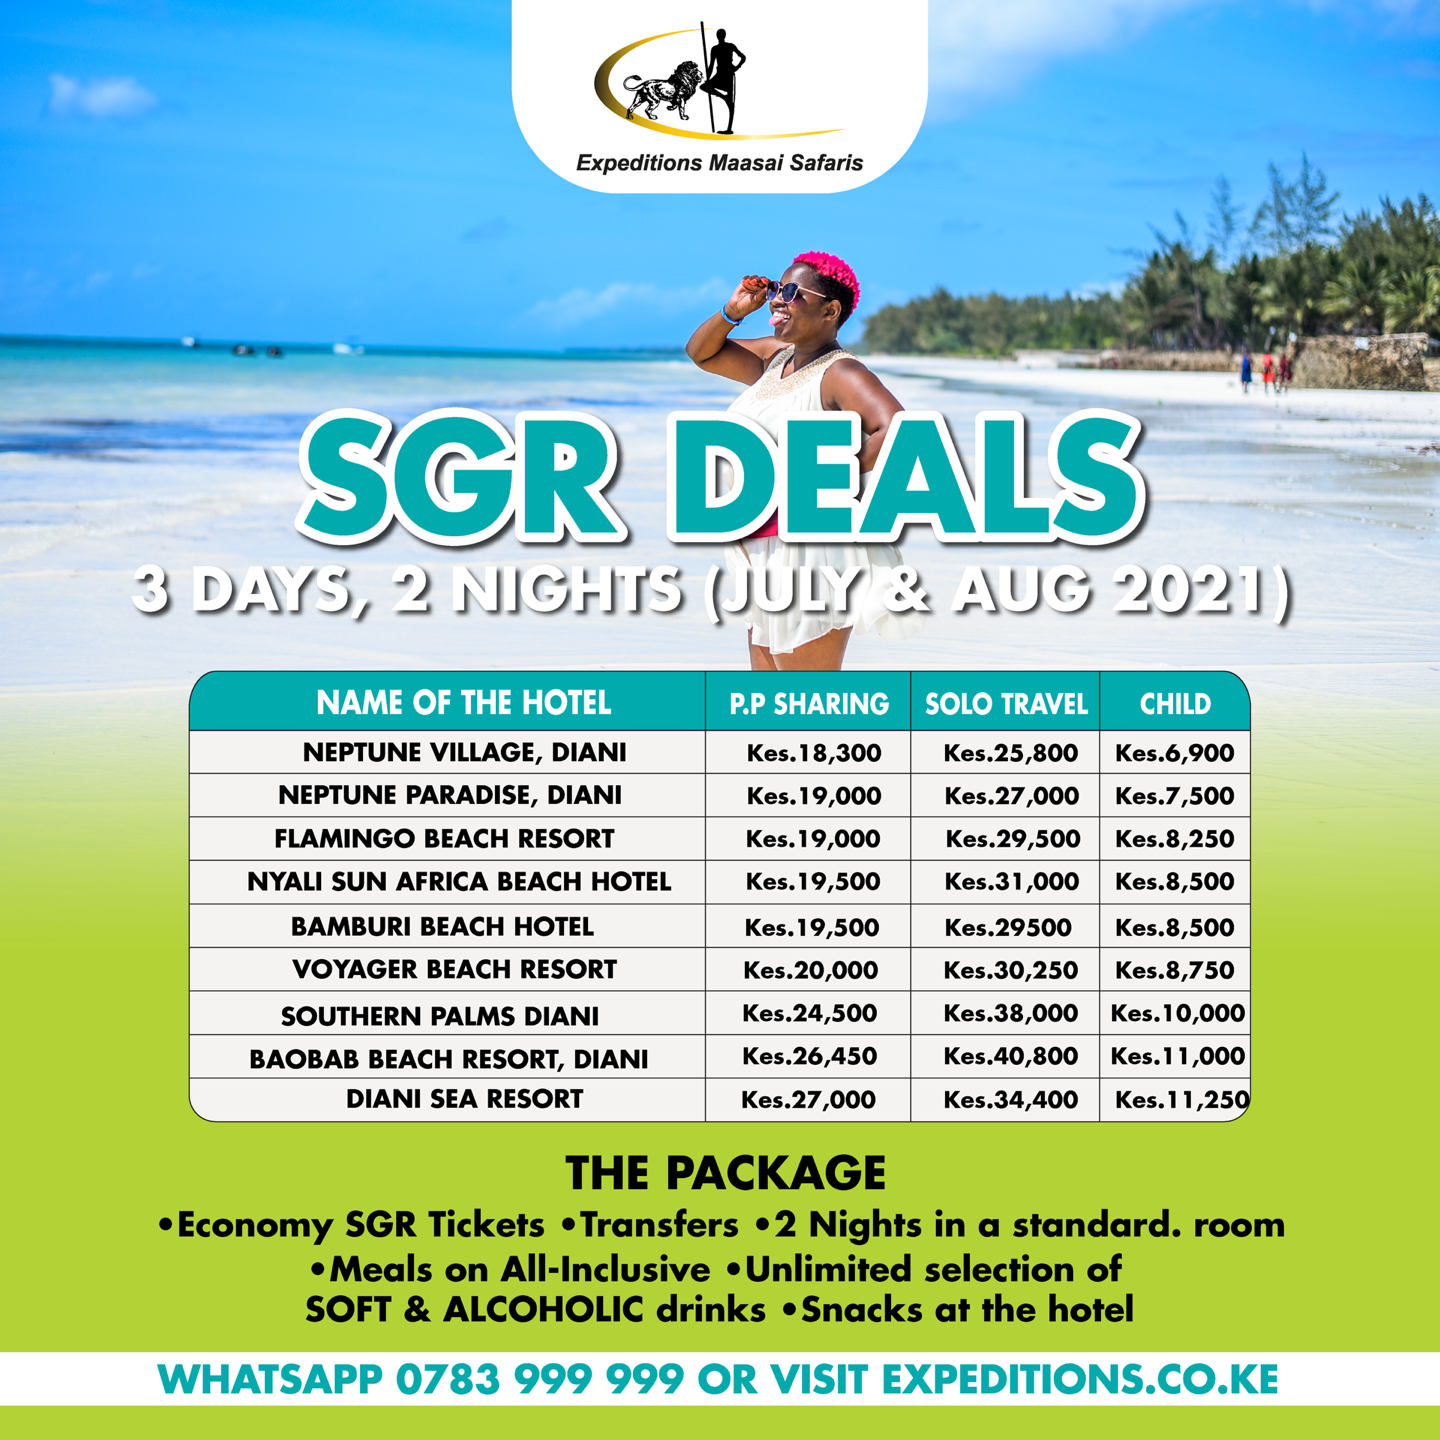 Enjoy the most discounted 3 days, 2 nights Mombasa SGR packages